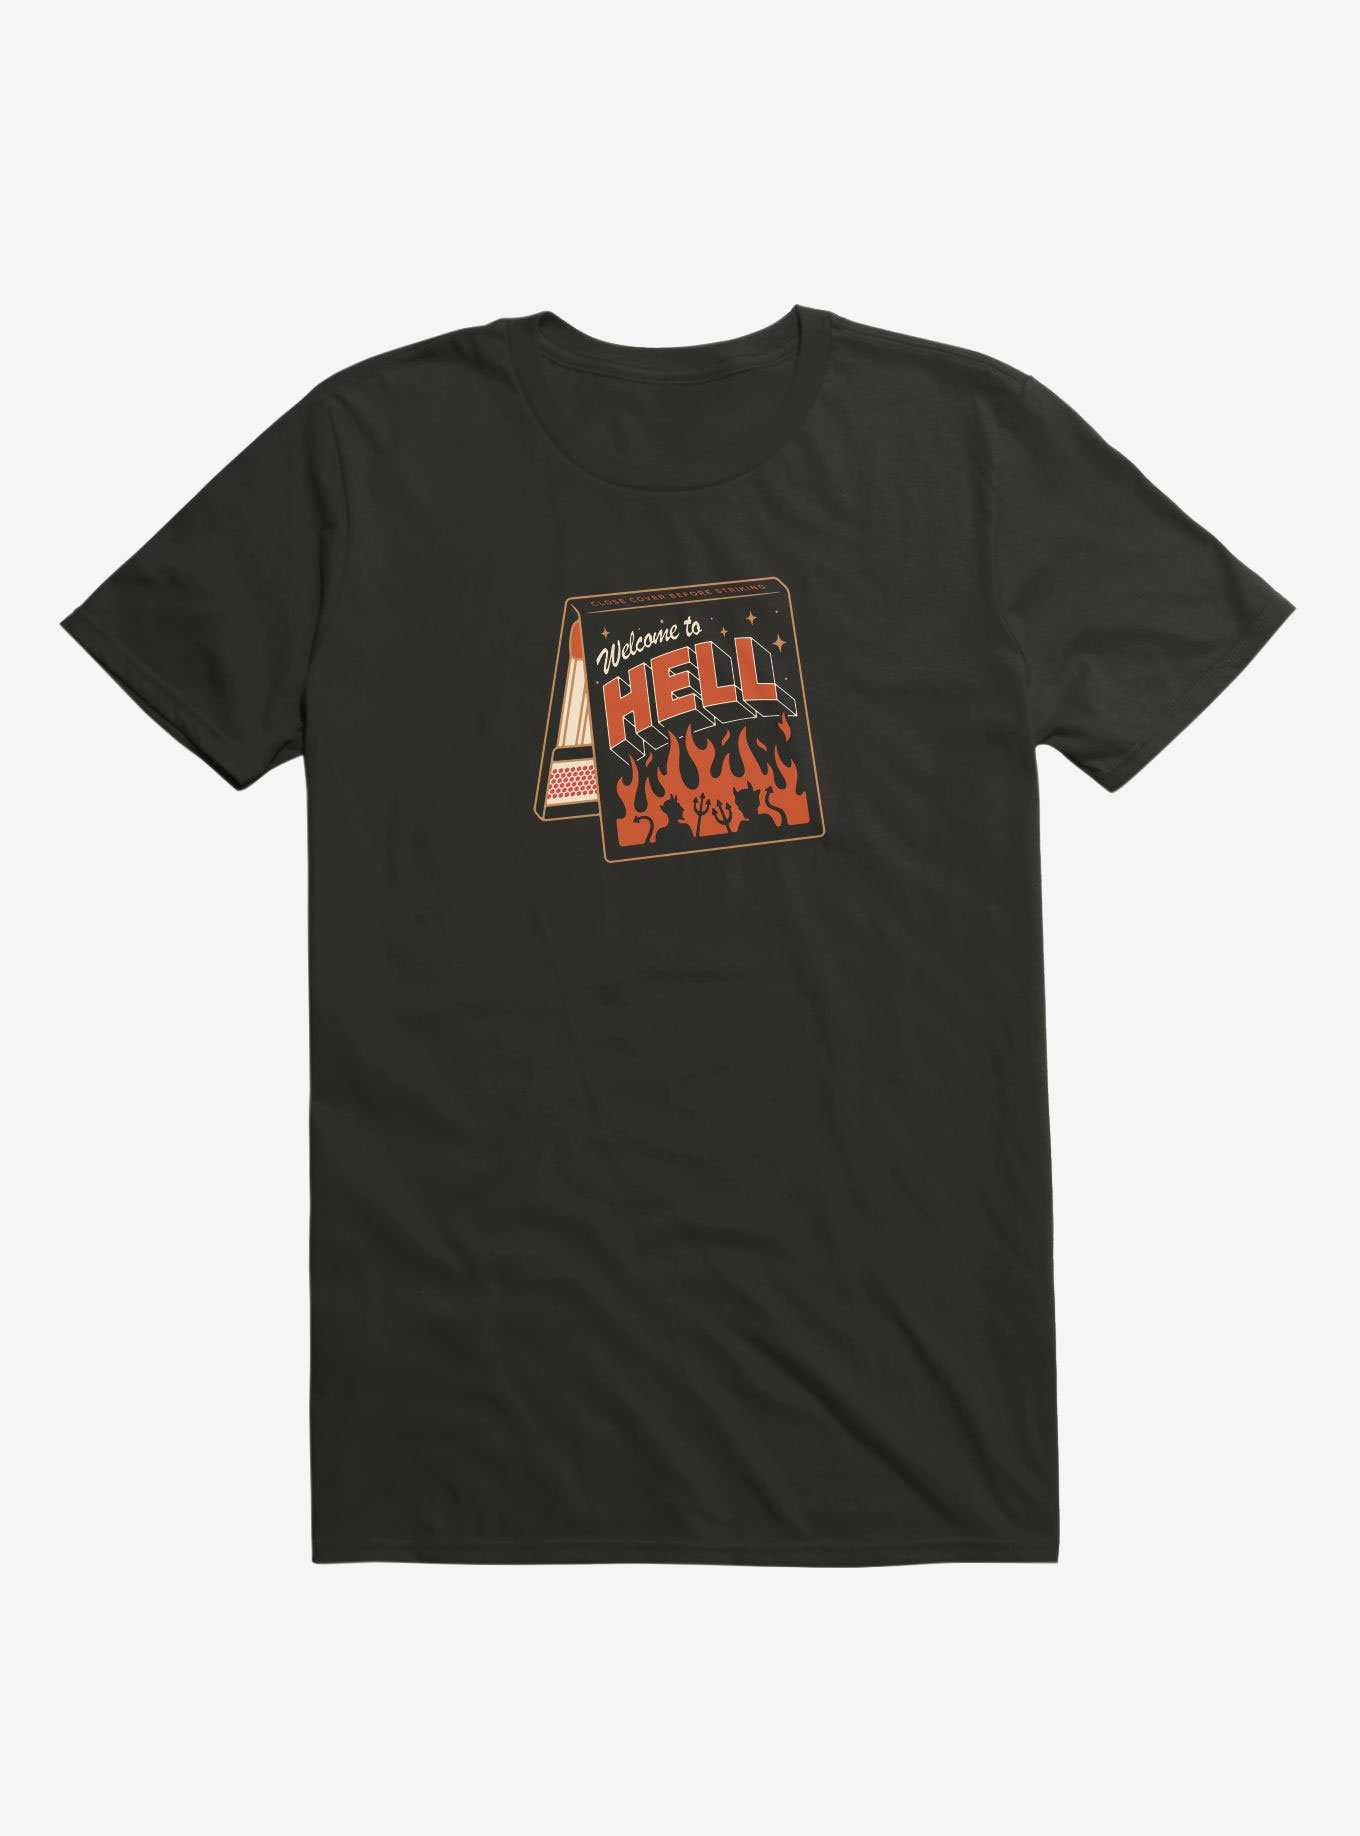 Match Made in Hell T-Shirt, , hi-res